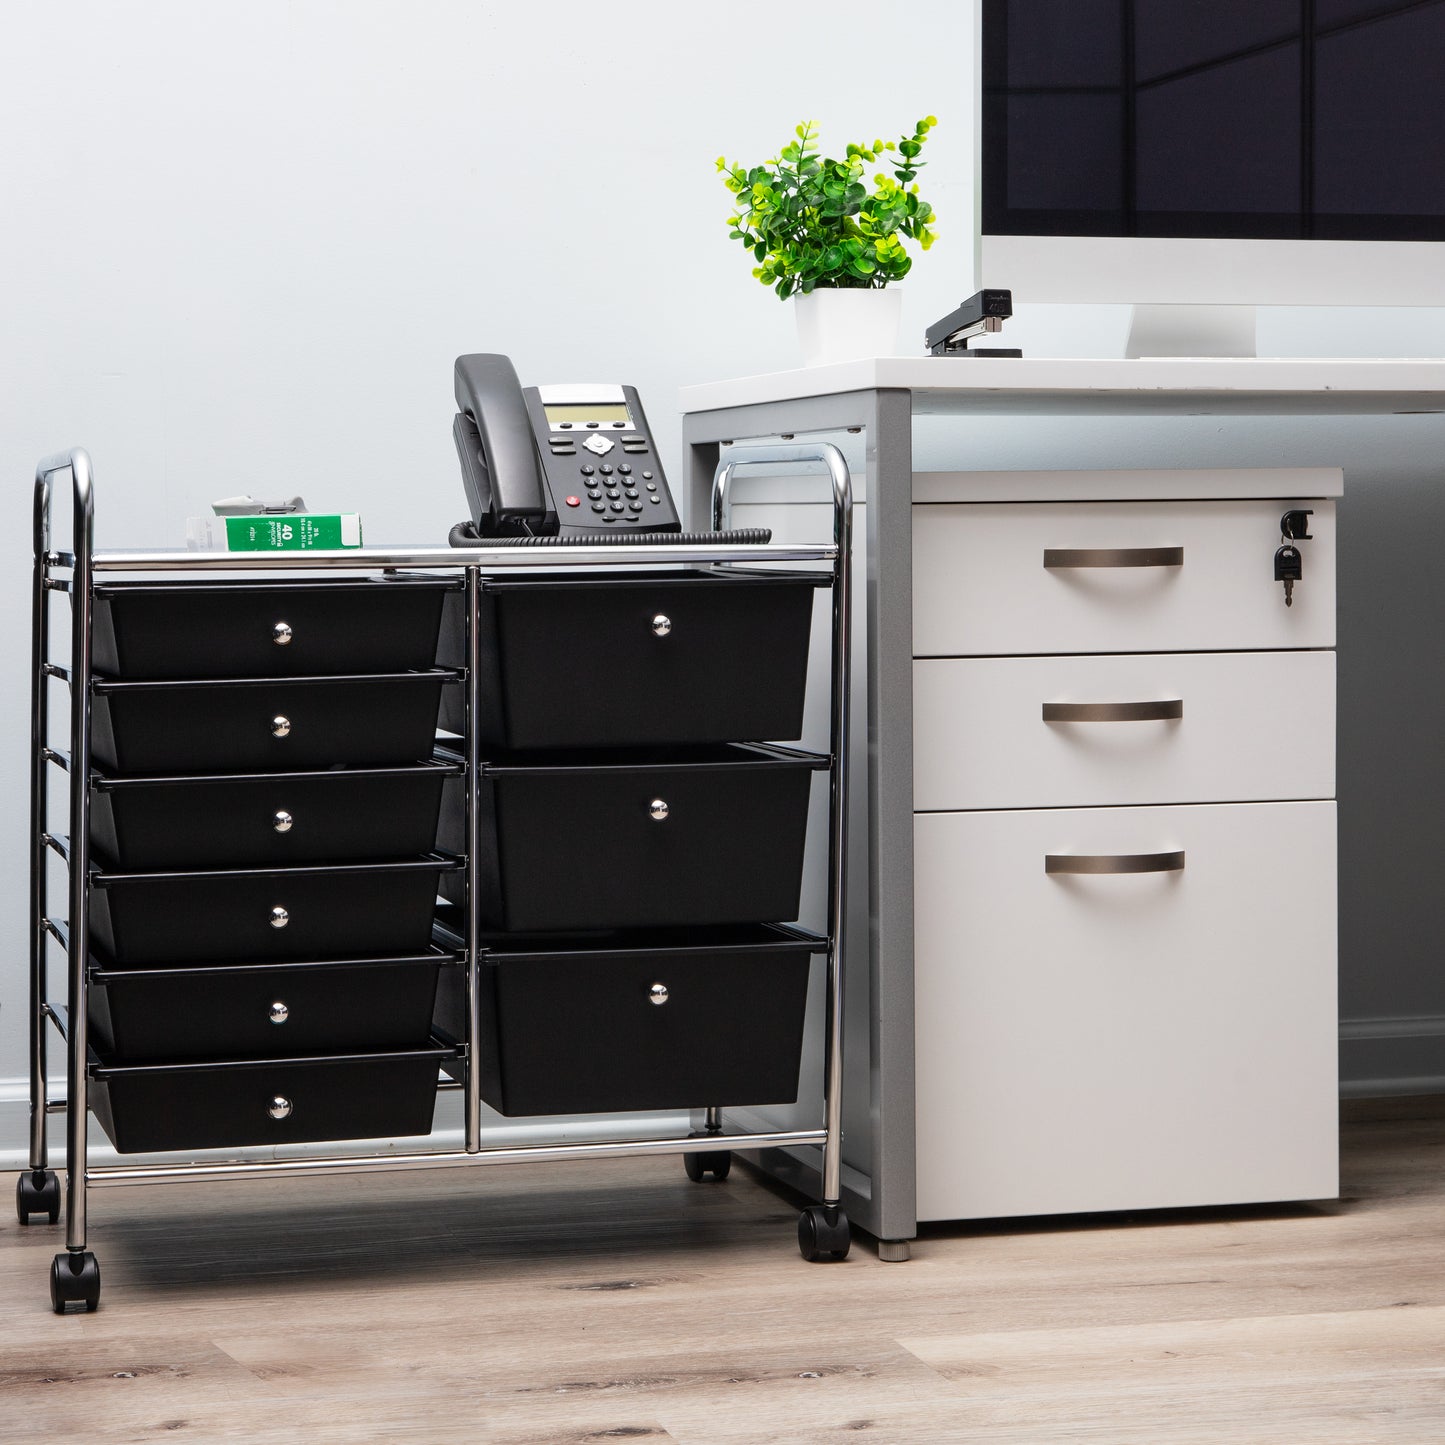 Mind Reader Elevate Collection, 3-Tier, 9-Drawer Mobile Utility Cart, Multi-Purpose, 360° Omnidirectional Casters, Removable Drawers, Metal and Plastic, 24.25"L x 15.25"W x 26.25"H, Black and Silver